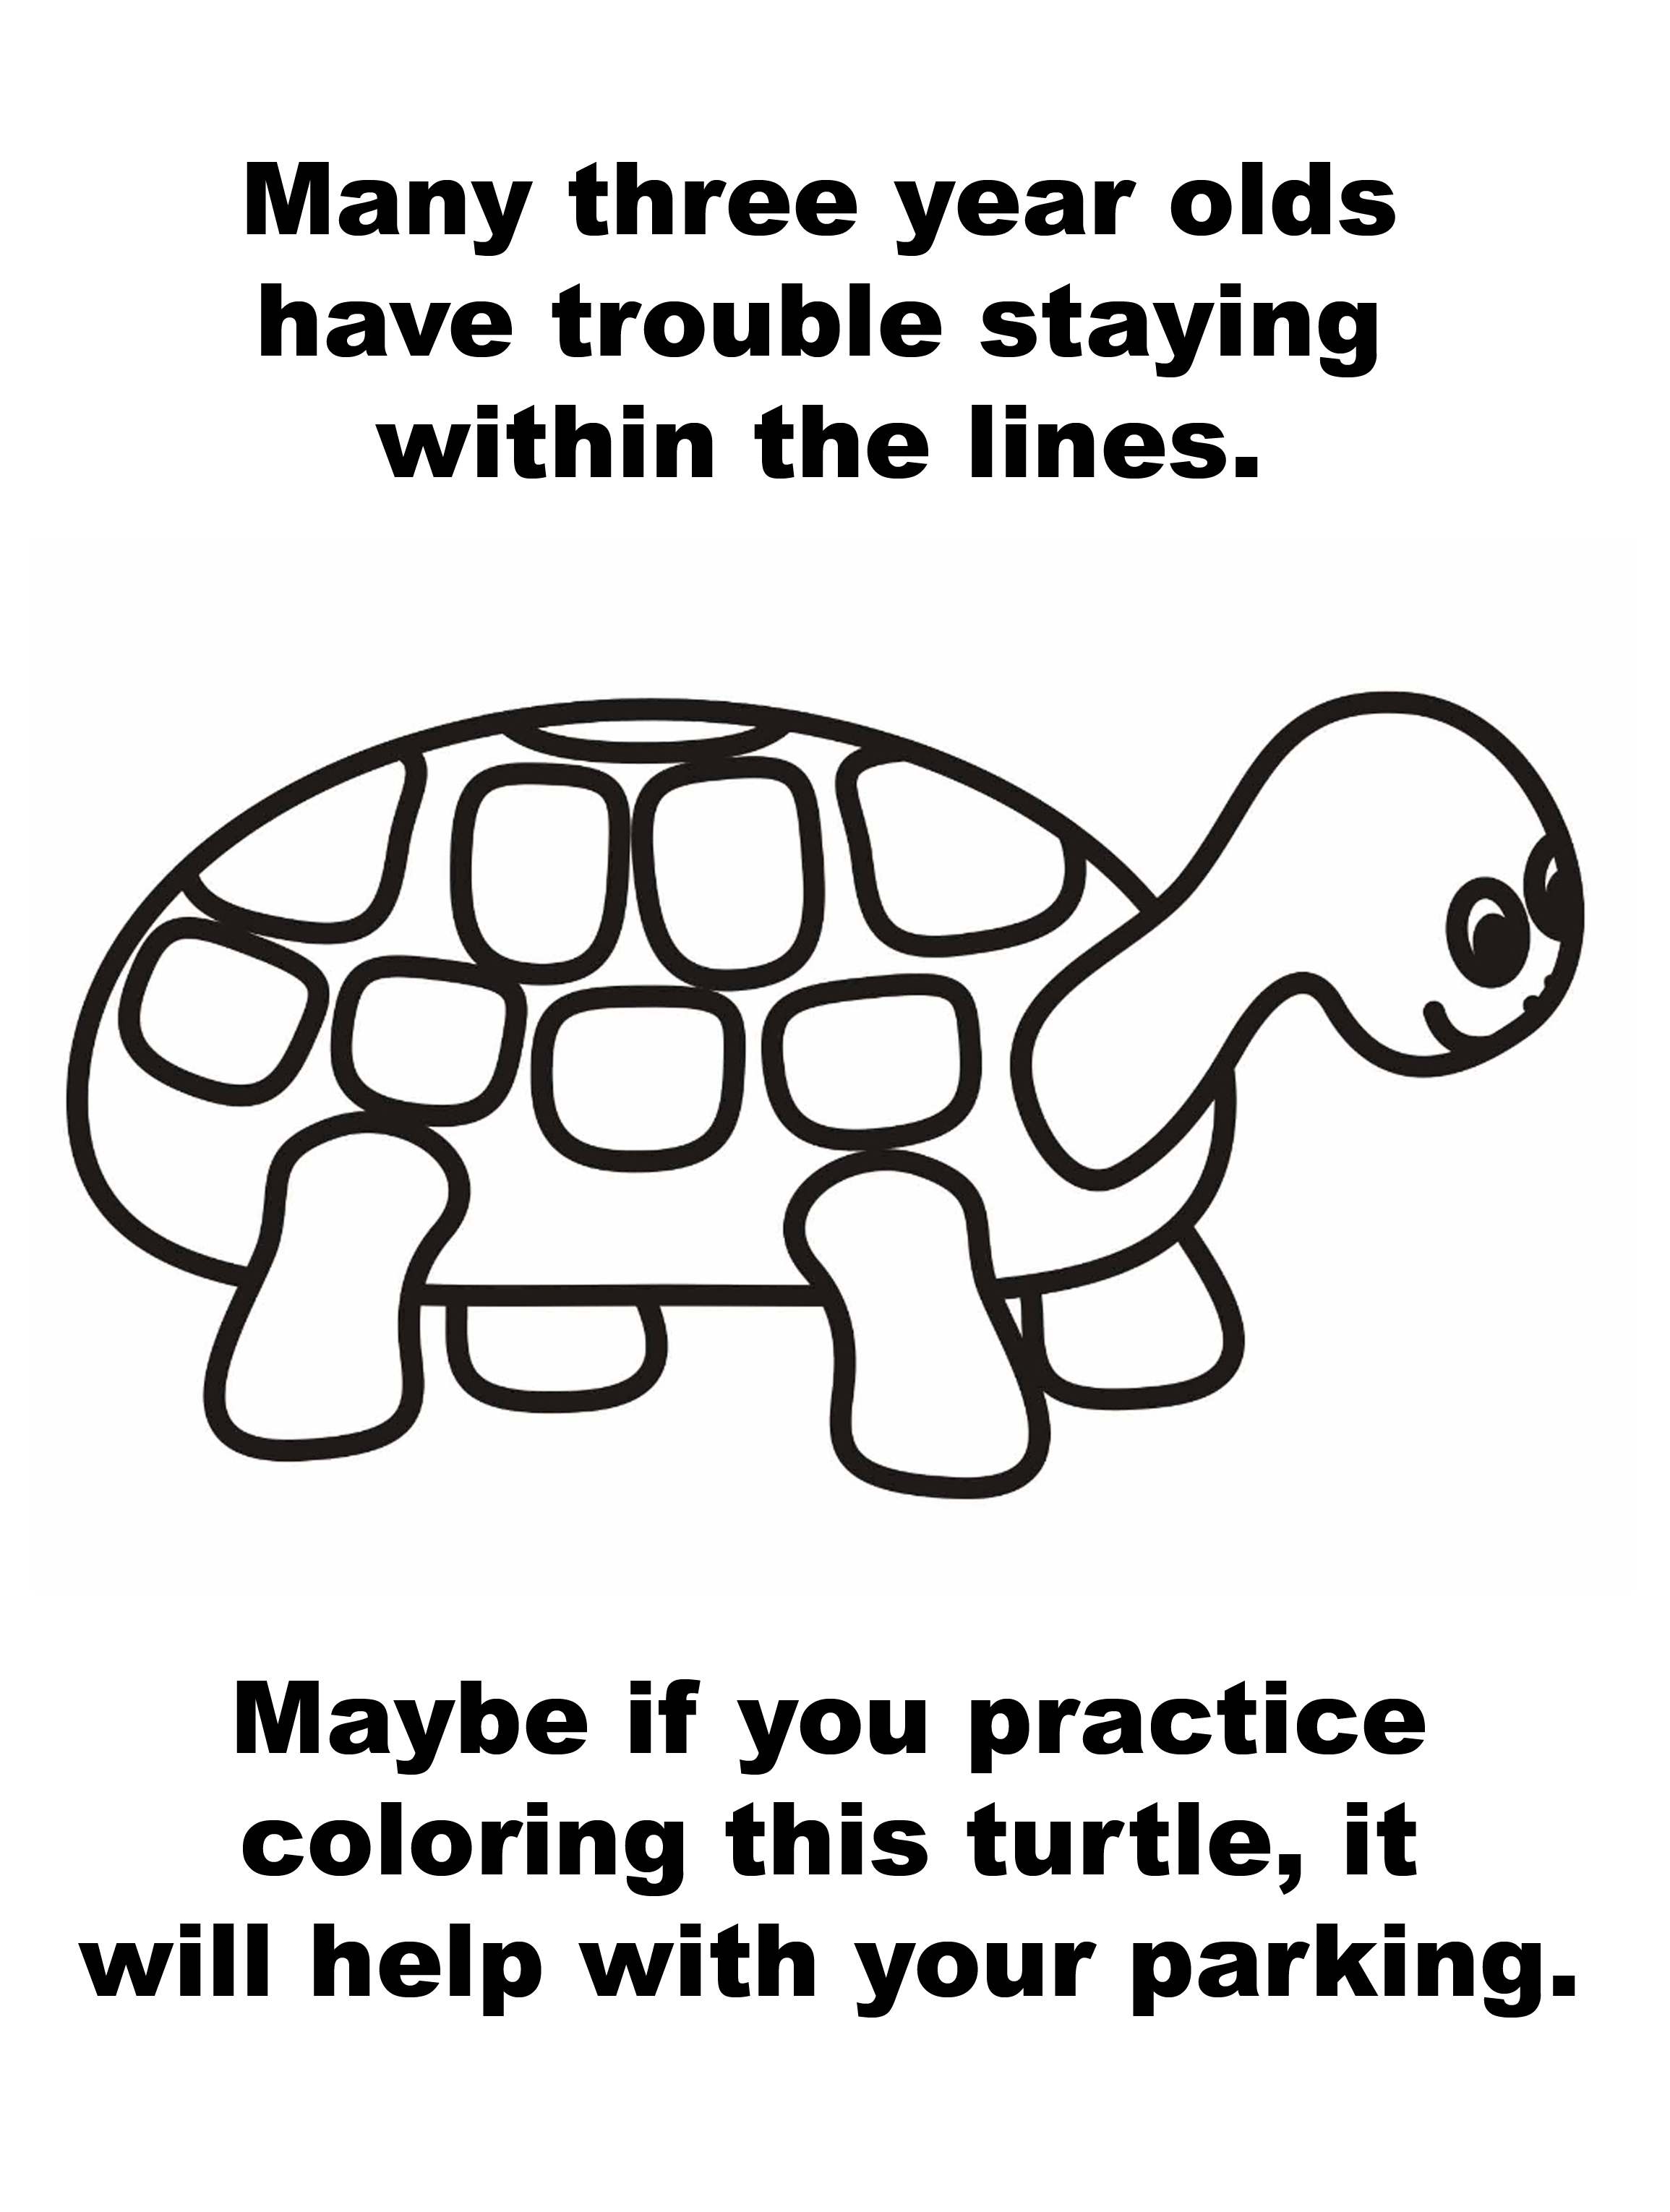 parking-ticket-turtle-coloring-line-3